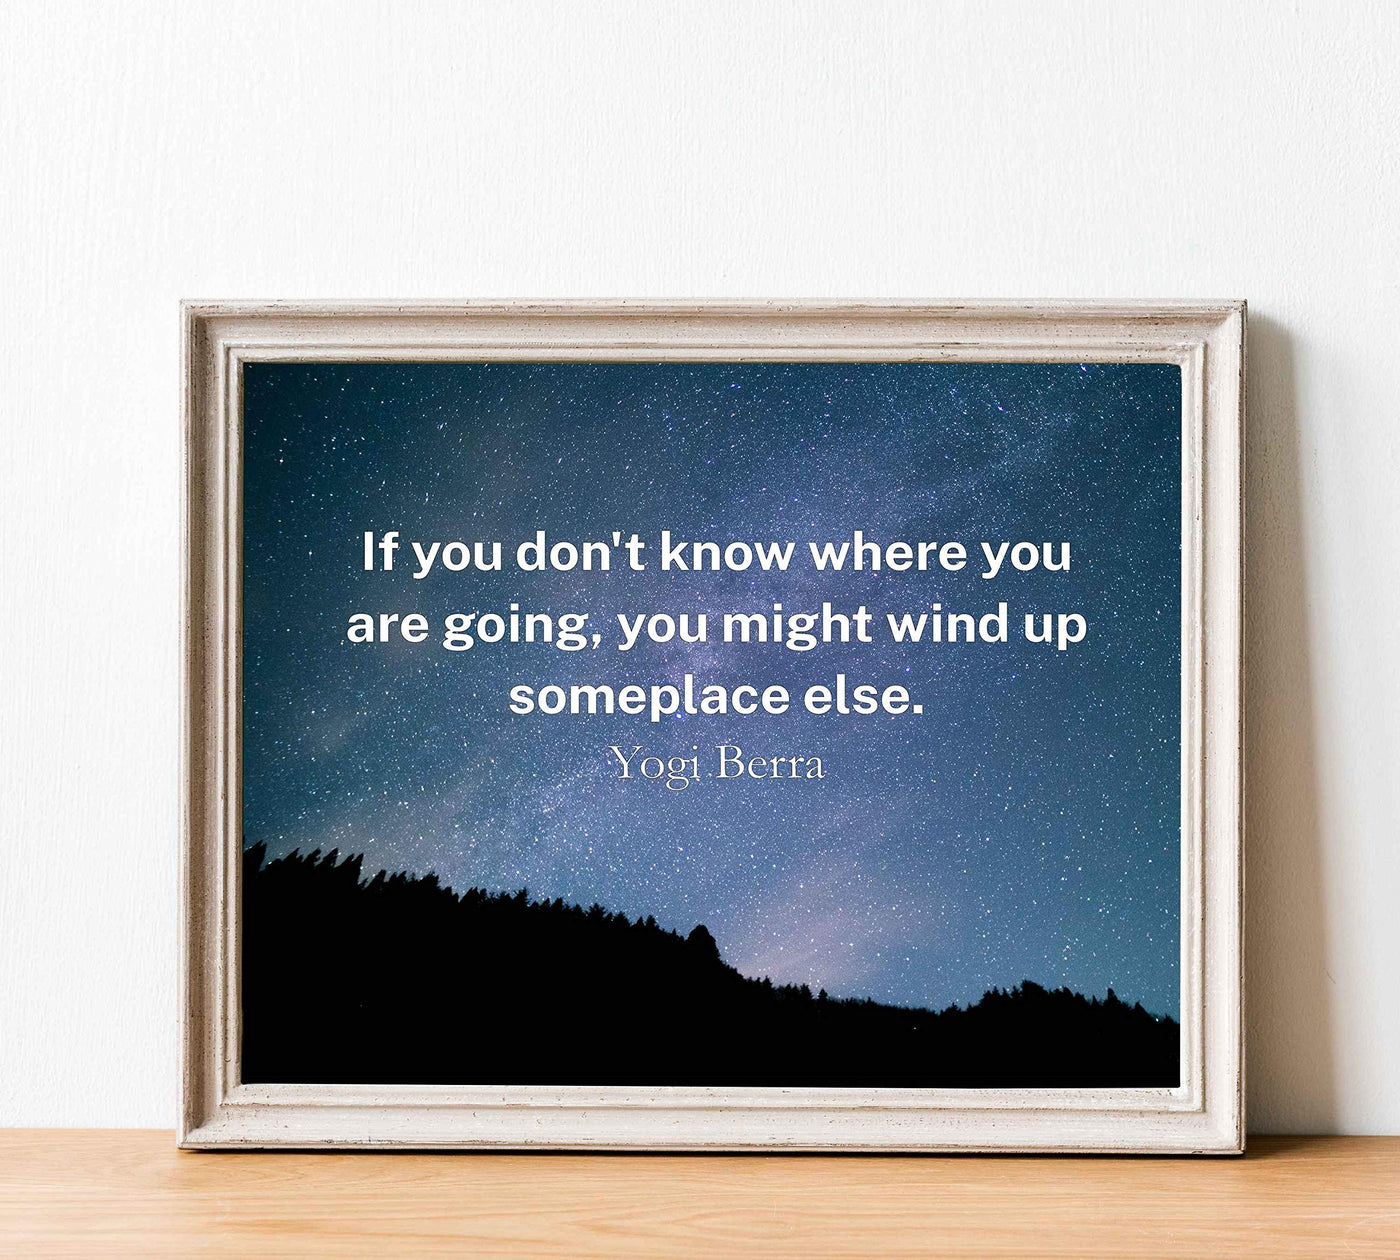 Yogi Berra Quotes Wall Art-?Might Wind Up Somewhere Else"-10x8" Starry Night Typographic Print-Ready to Frame. Motivational Home-Office-Zen Decor. Inspirational Gift for Yankee Baseball Fans!